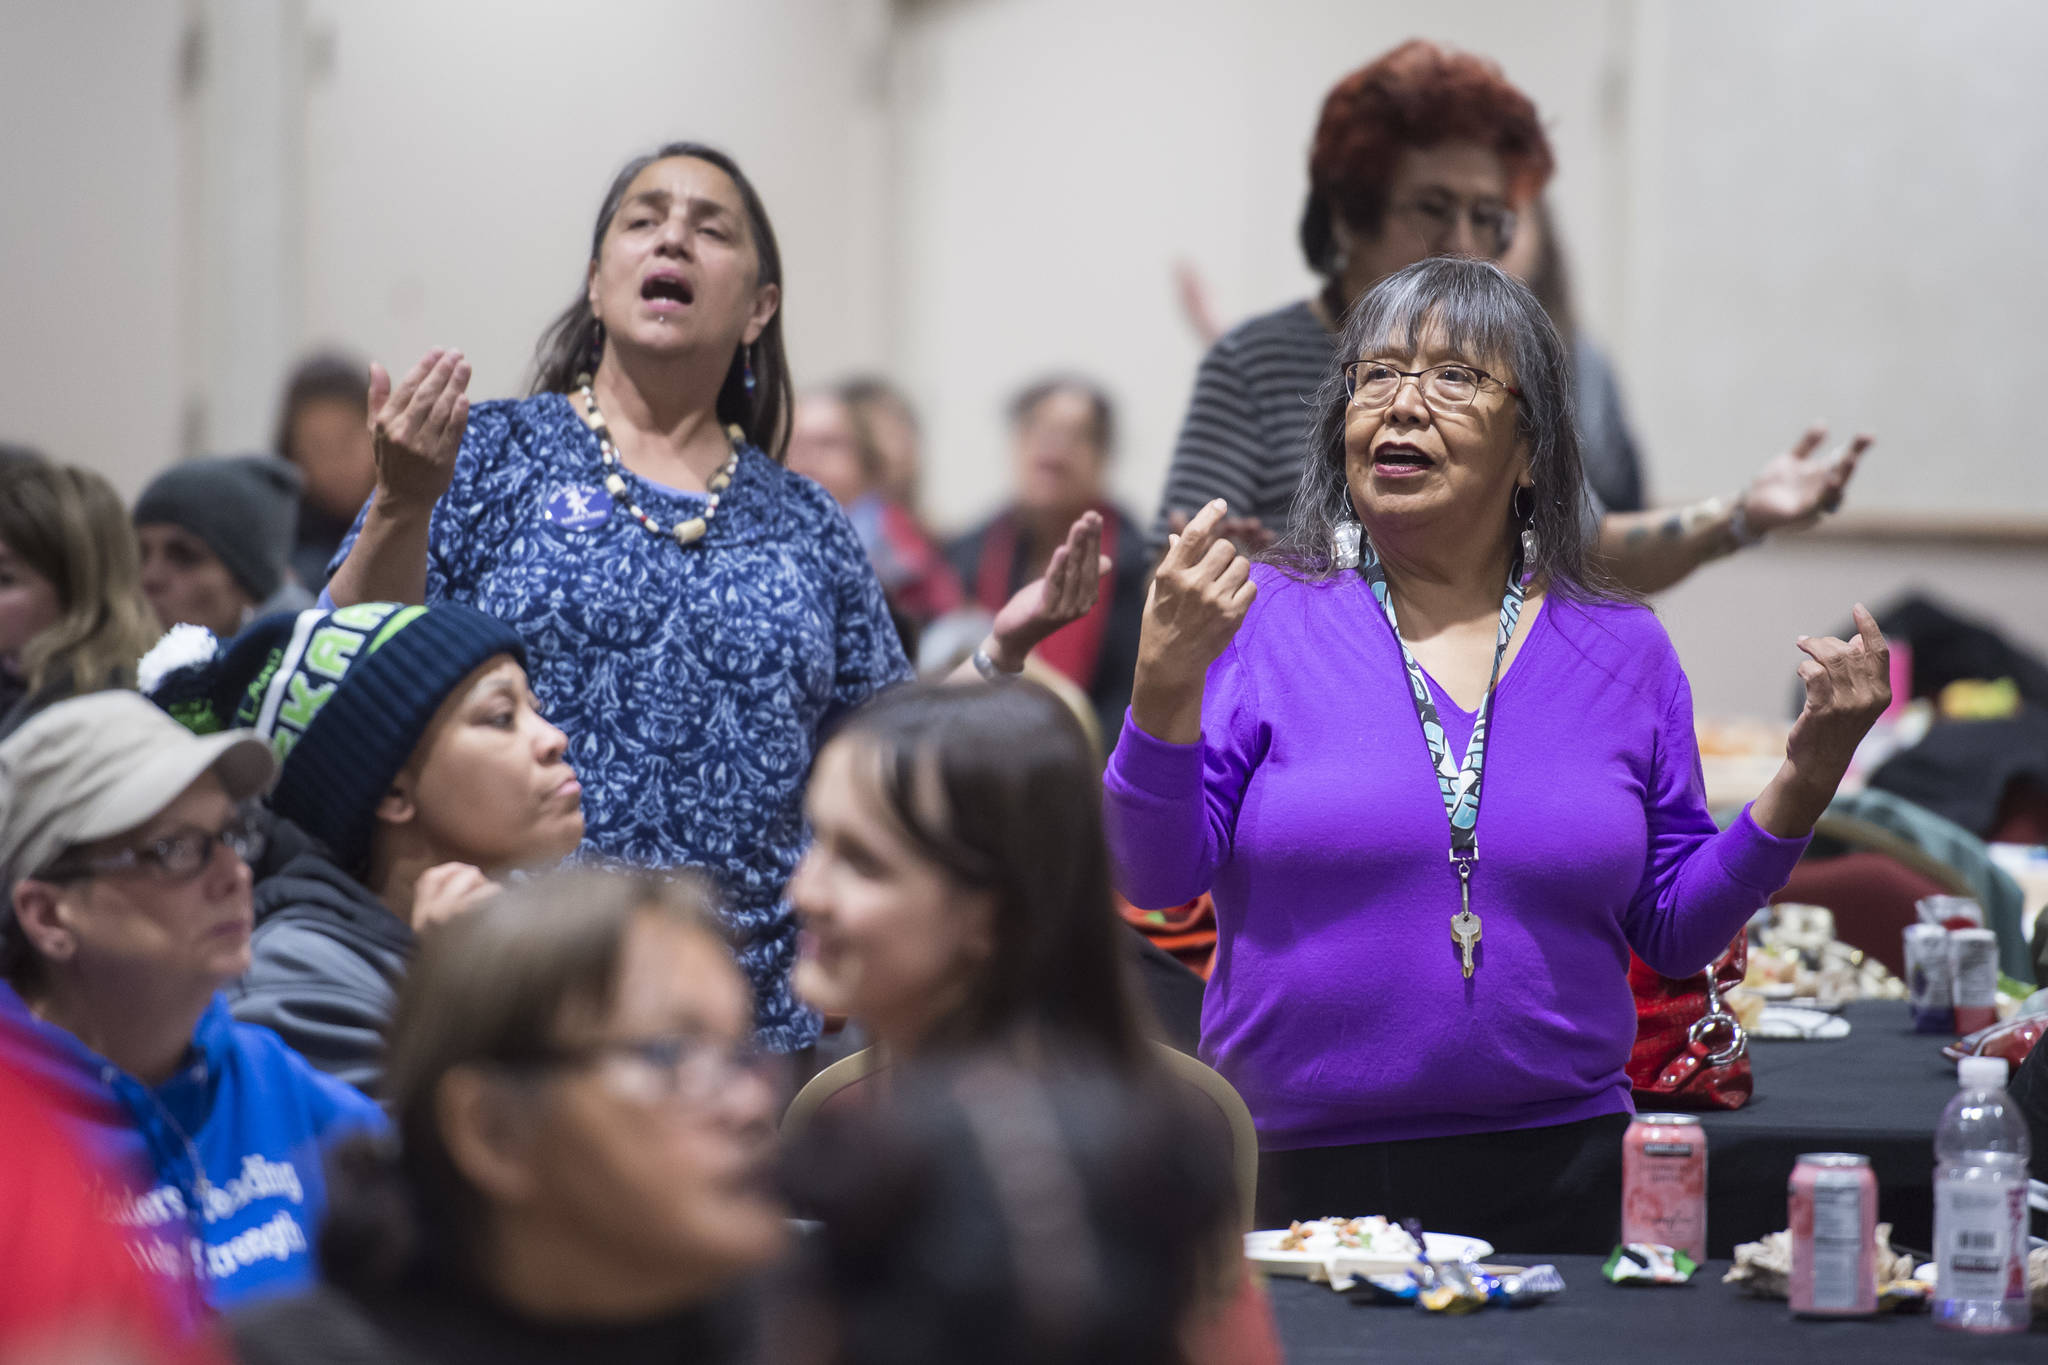 Nancy Keen, left, and Leona Santiago, right, pay tribute to the Woosh.ji.een Dance Group as they perform during a Celebrate Survivors gathering sponsored by Central Council Tlingit and Haida Indian Tribes of Alaska and AWARE in the Elizabeth Peratrovich Hall on Tuesday, Oct. 23, 2018. October is Domestic Violence Awareness Month. (Michael Penn | Juneau Empire)